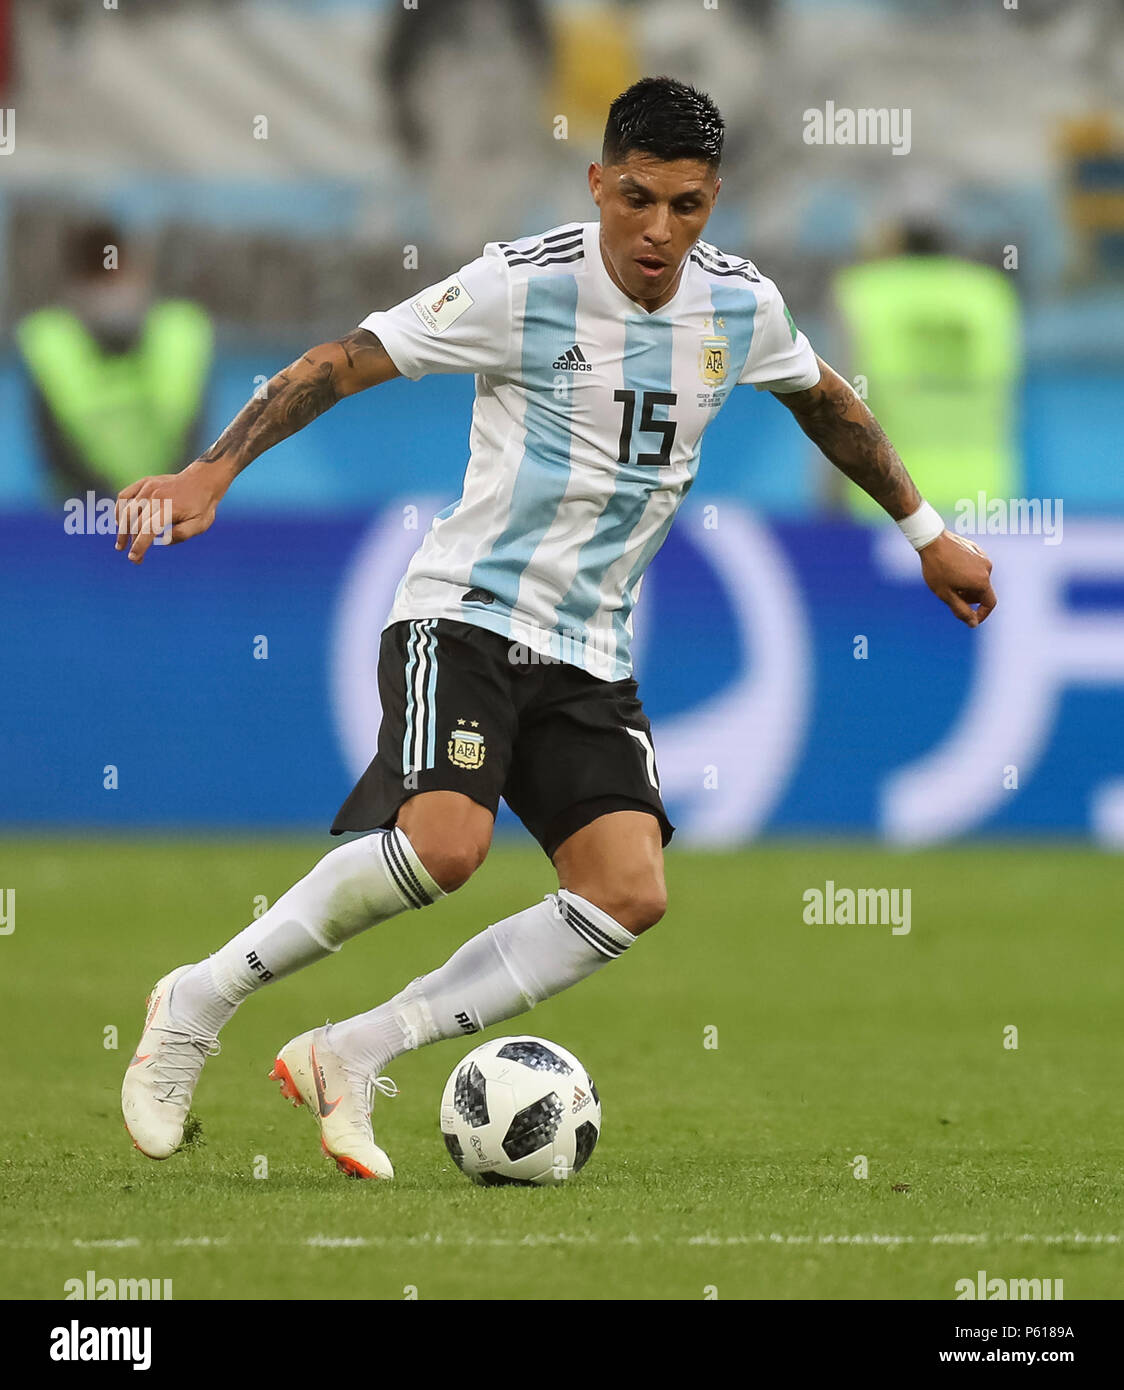 St Petersburg, Russia. 26th Jun, 2018. Enzo Perez of Argentina during the 2018 FIFA World Cup Group D match between Nigeria and Argentina at Saint Petersburg Stadium on June 26th 2018 in Saint Petersburg, Russia. (Photo by Daniel Chesterton/phcimages.com) Credit: PHC Images/Alamy Live News Stock Photo